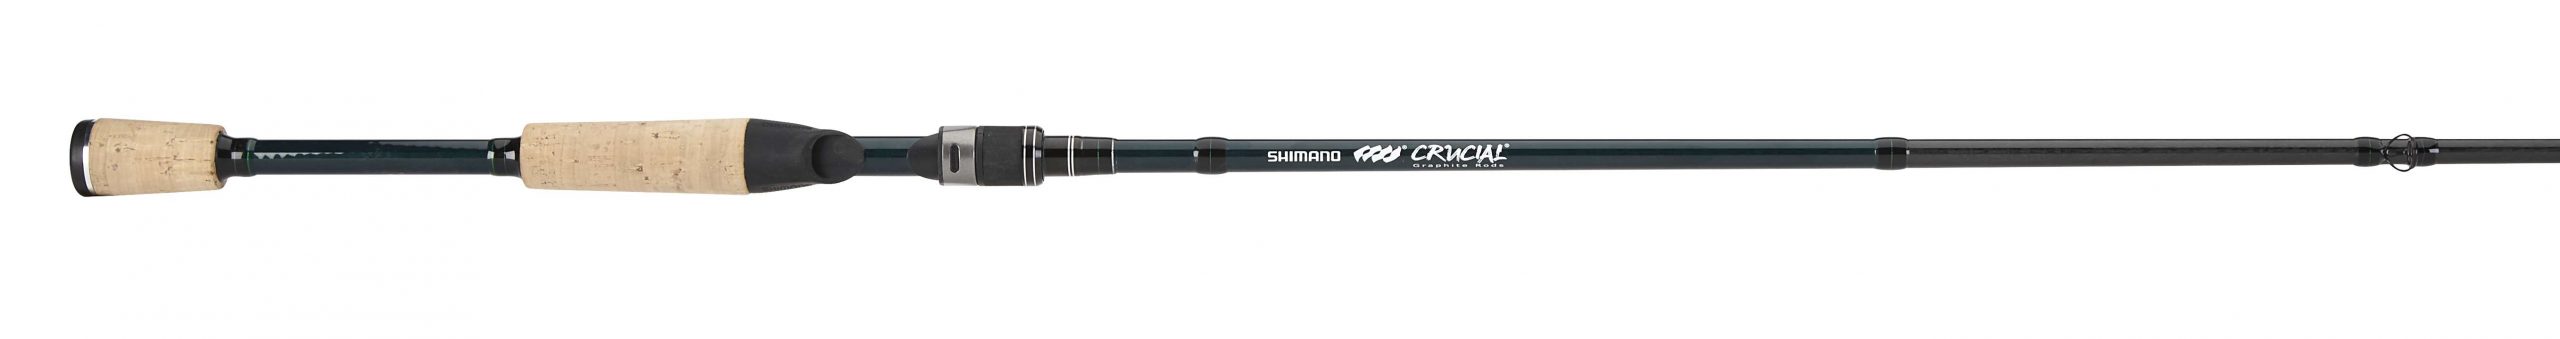 <p>Shimano Crucial Split Grip Handle The Crucial line also gets several new split grip models for 2014-15.</p>
